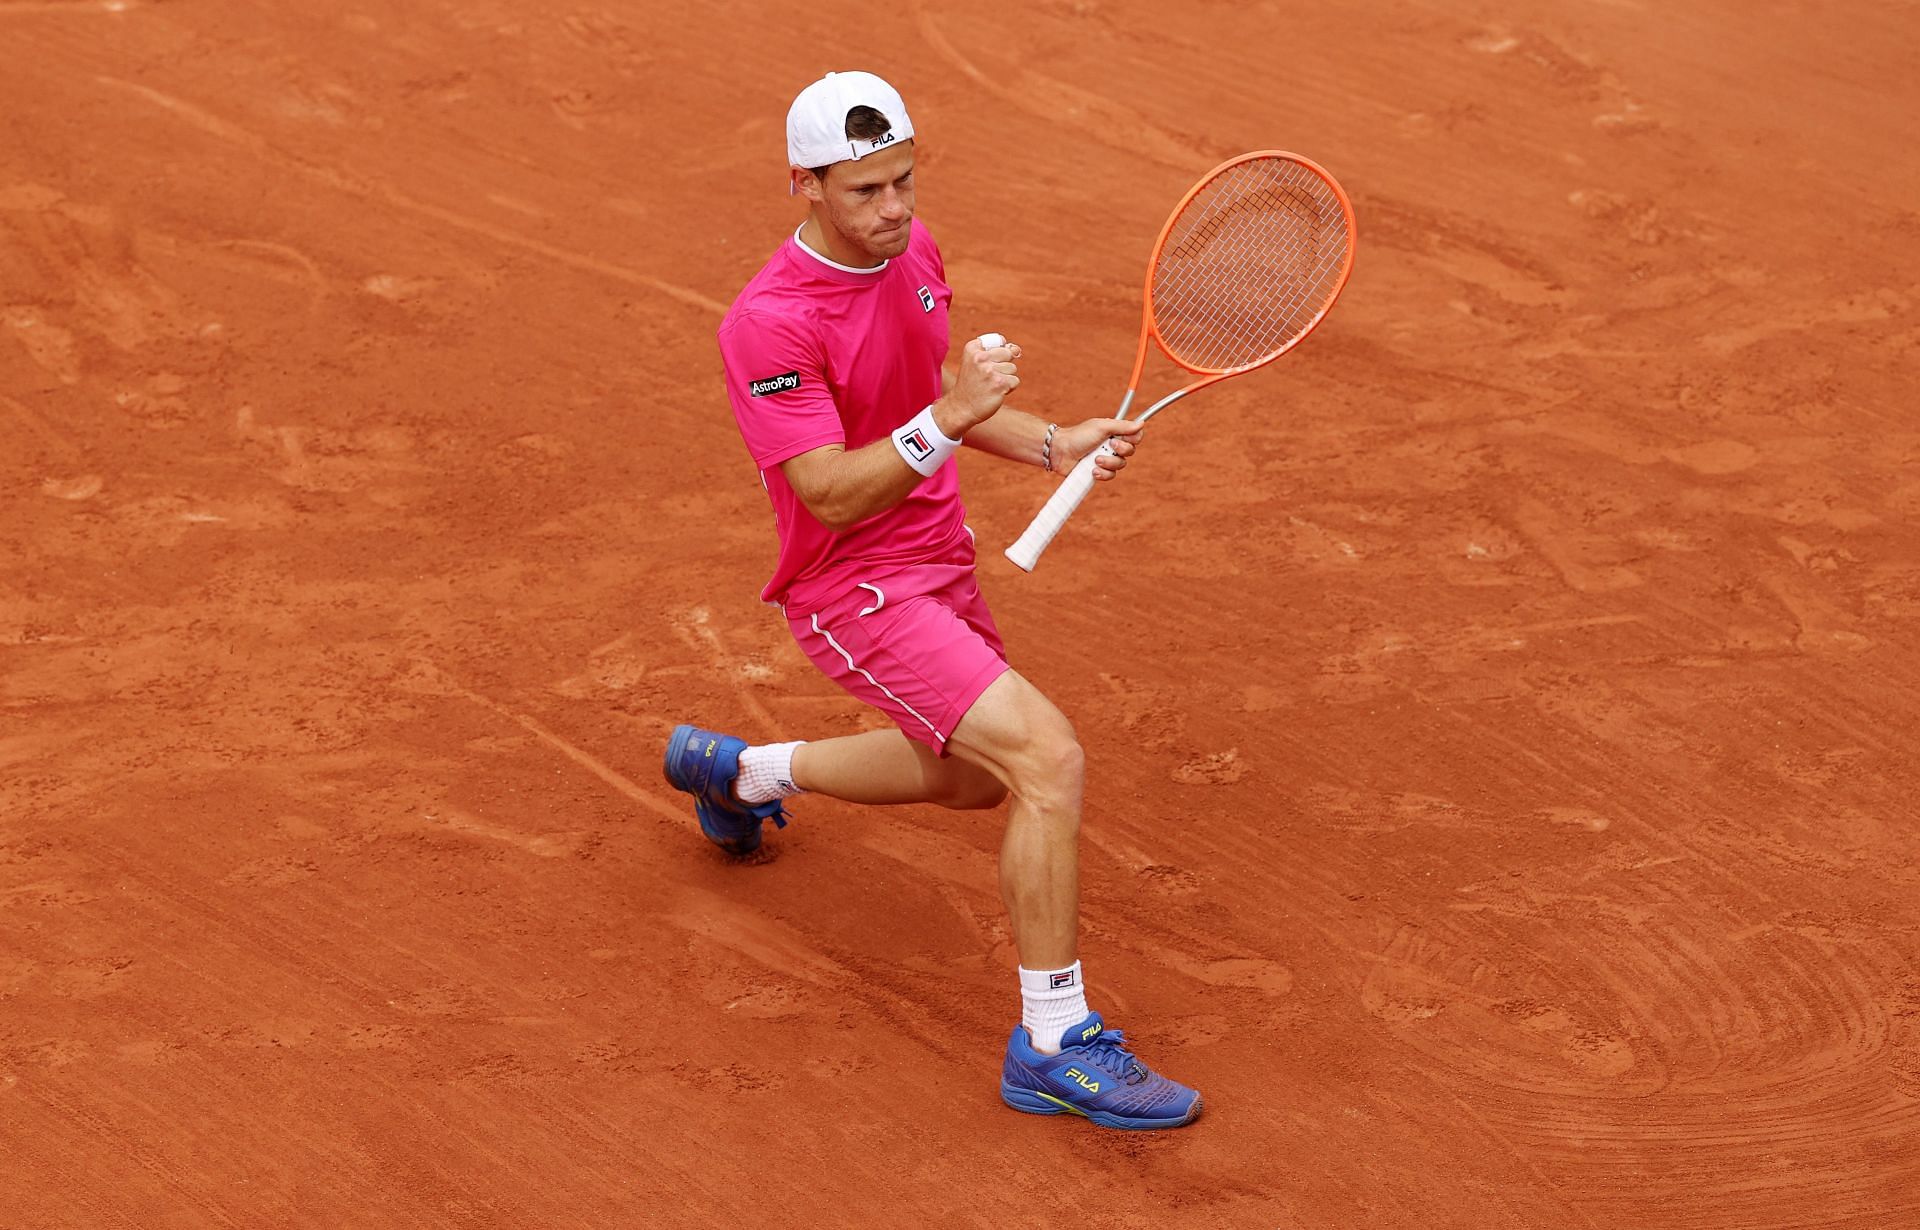 Diego Schwartzman in action at the 2022 French Open